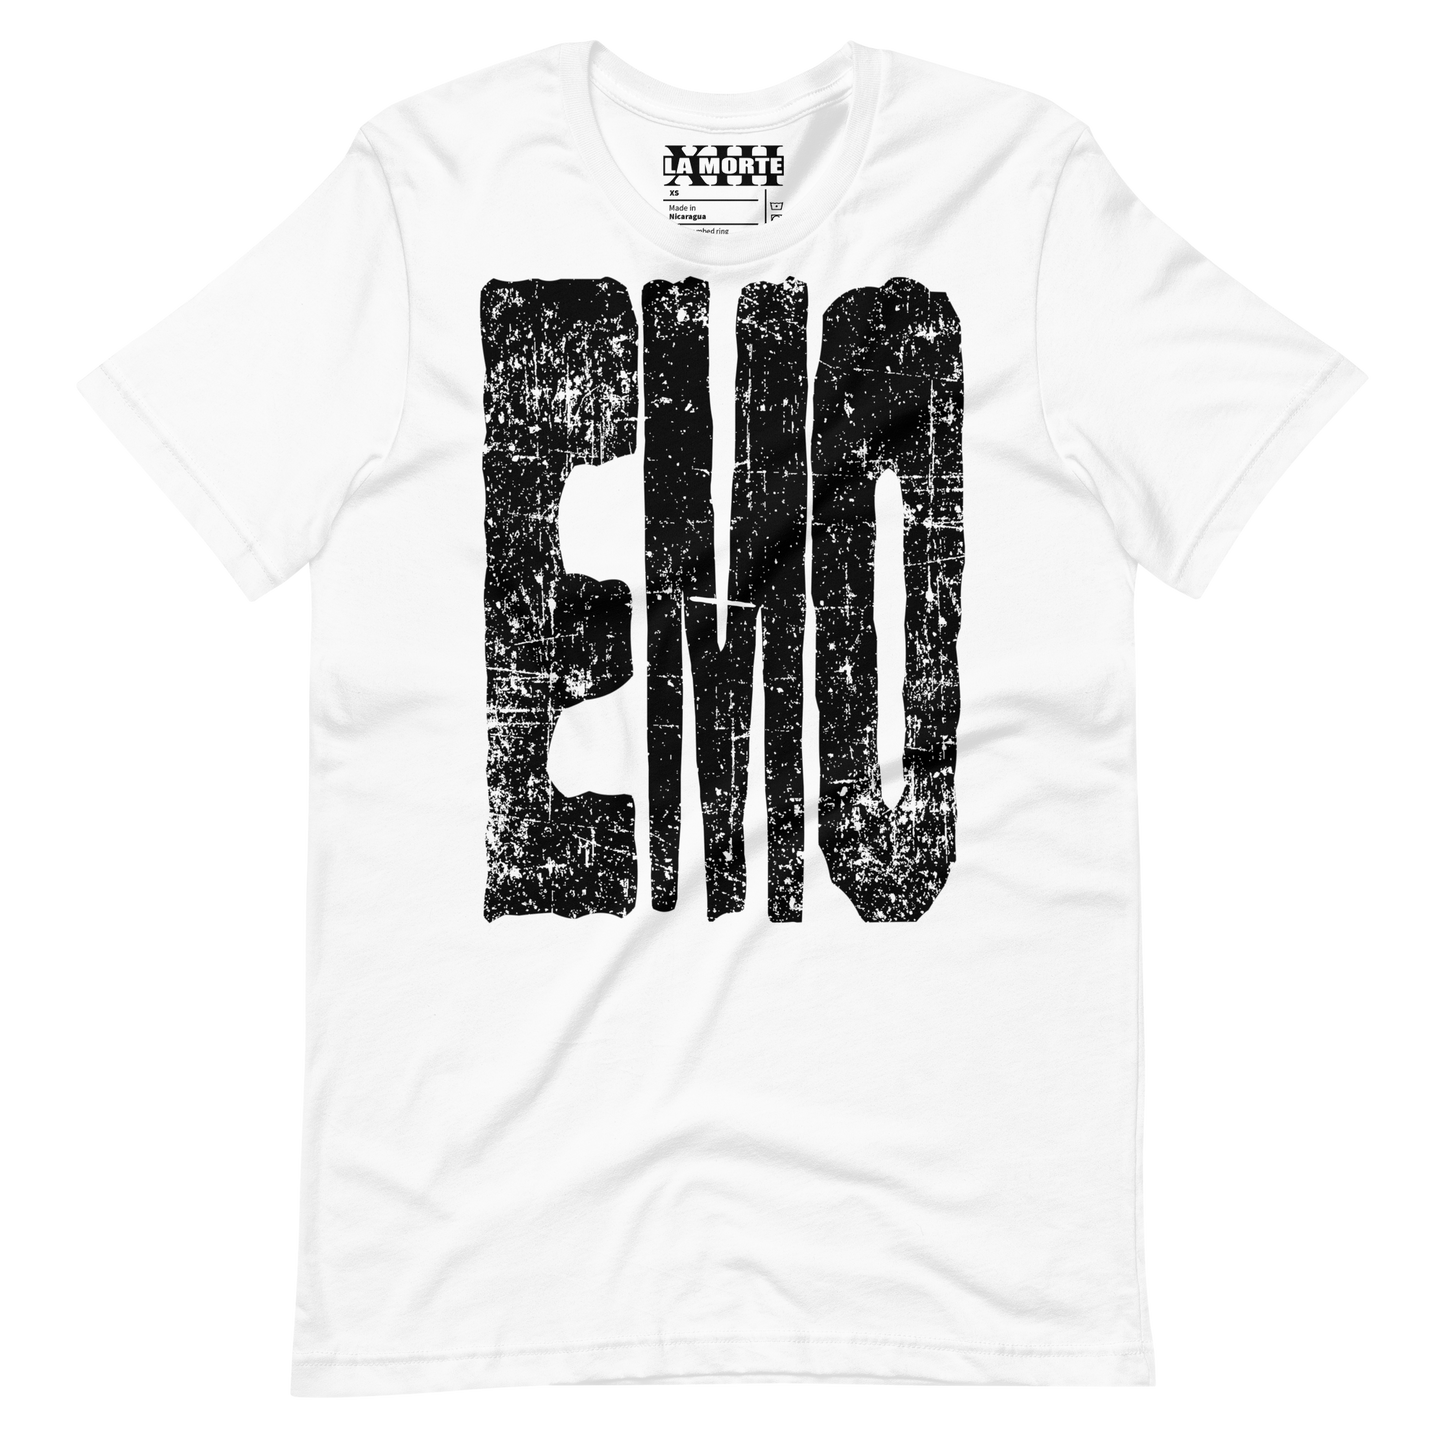 EMO • Unisex T-Shirt • The Inverted Collection